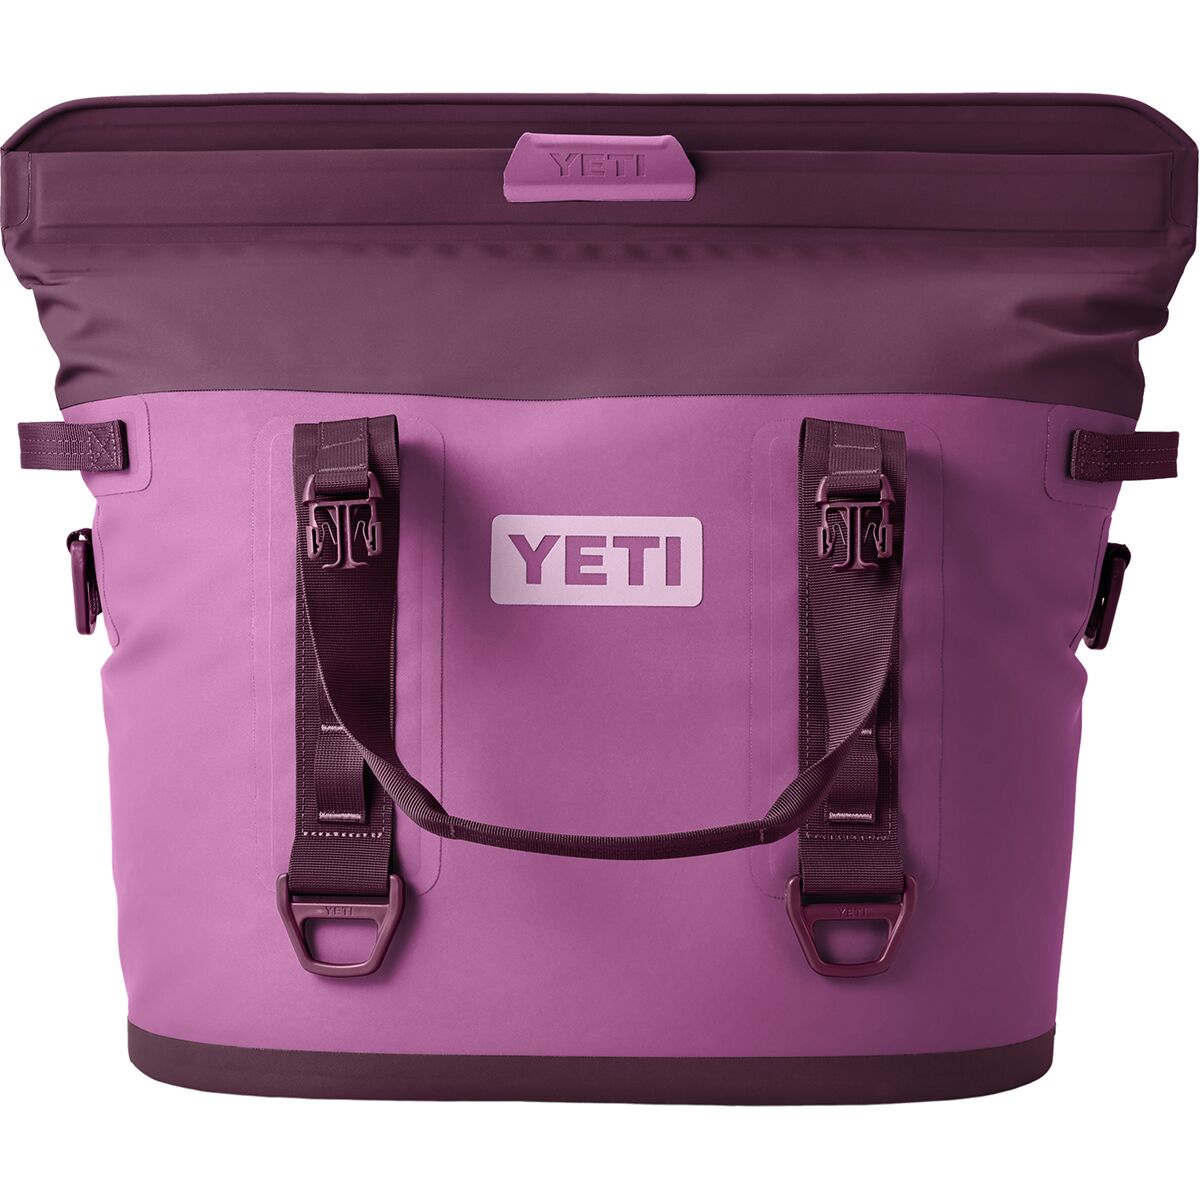 Maiden Voyage of our Yeti Hopper M30 Soft Cooler — Half Past First